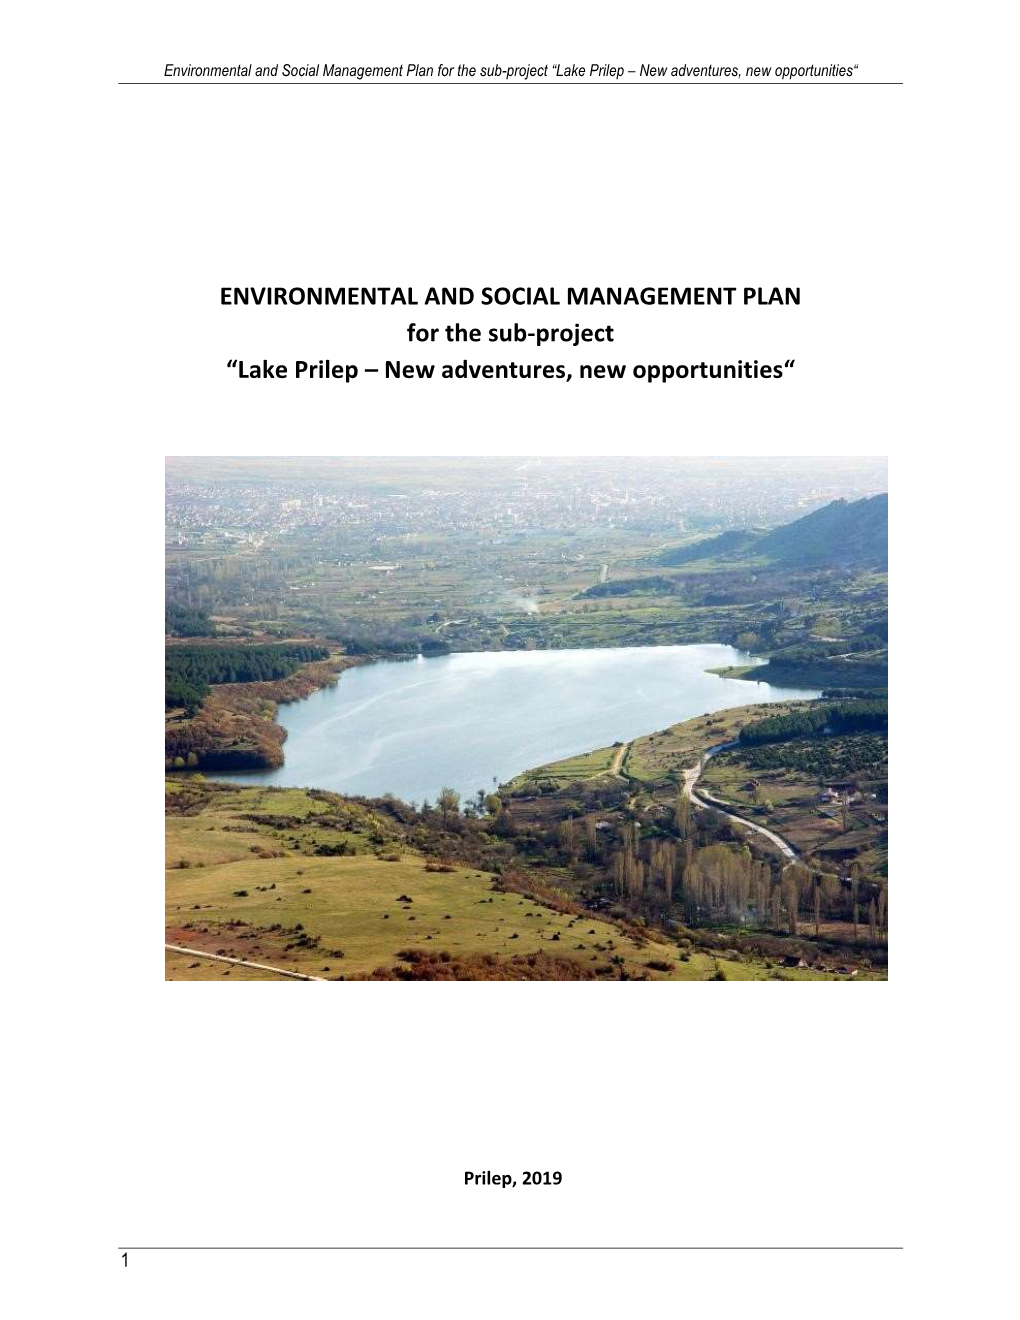 Lake Prilep – New Adventures, New Opportunities“